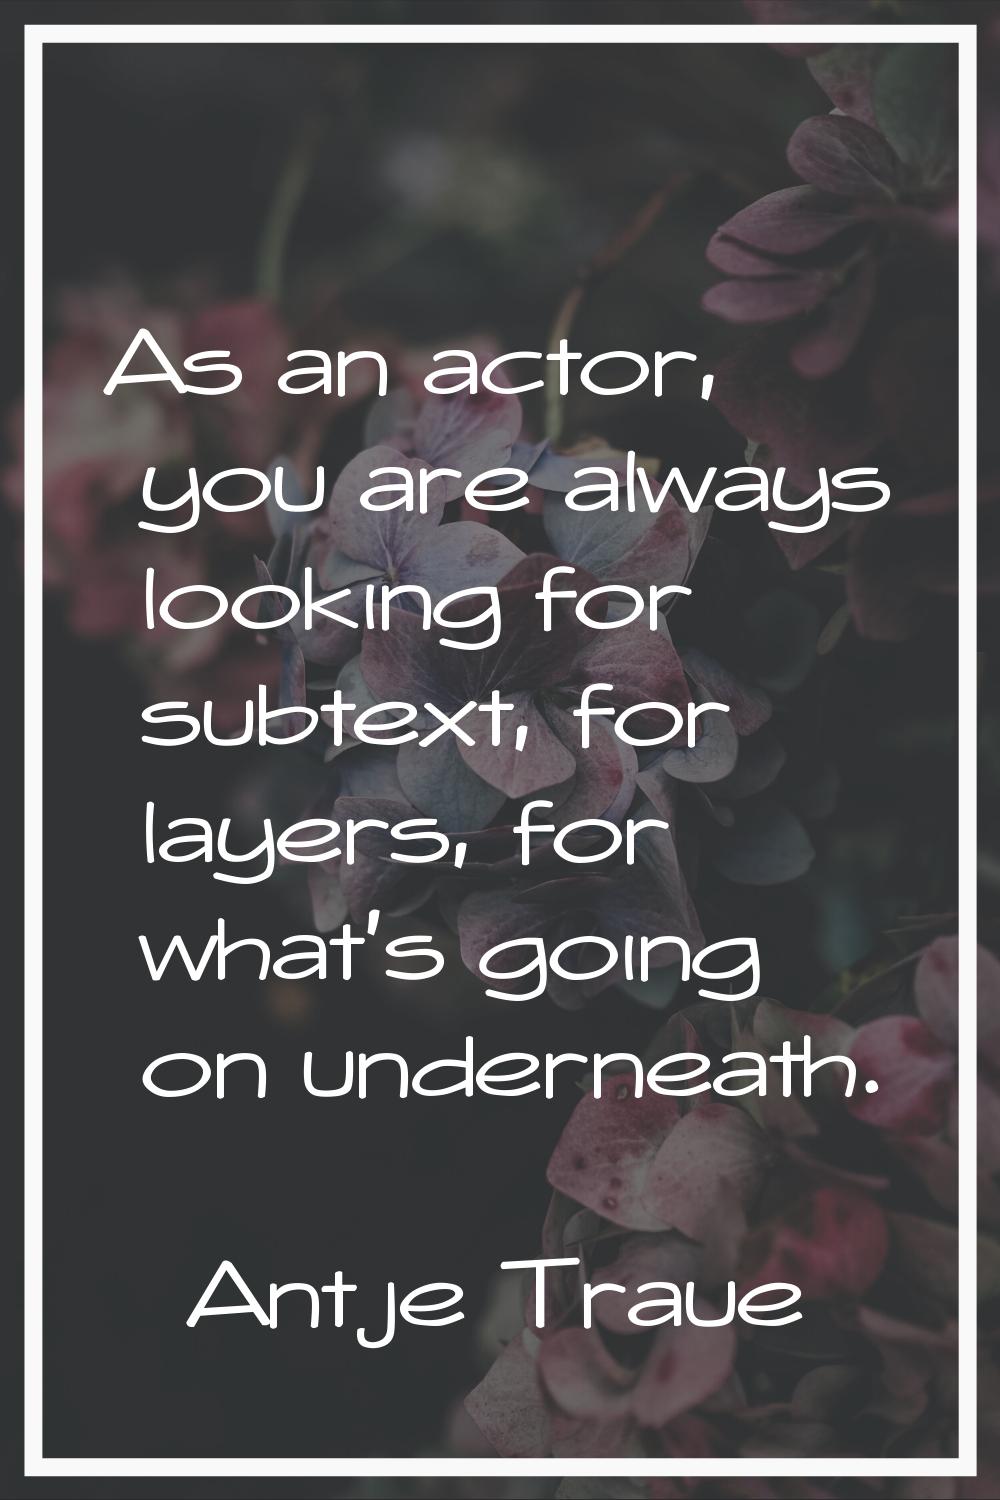 As an actor, you are always looking for subtext, for layers, for what's going on underneath.